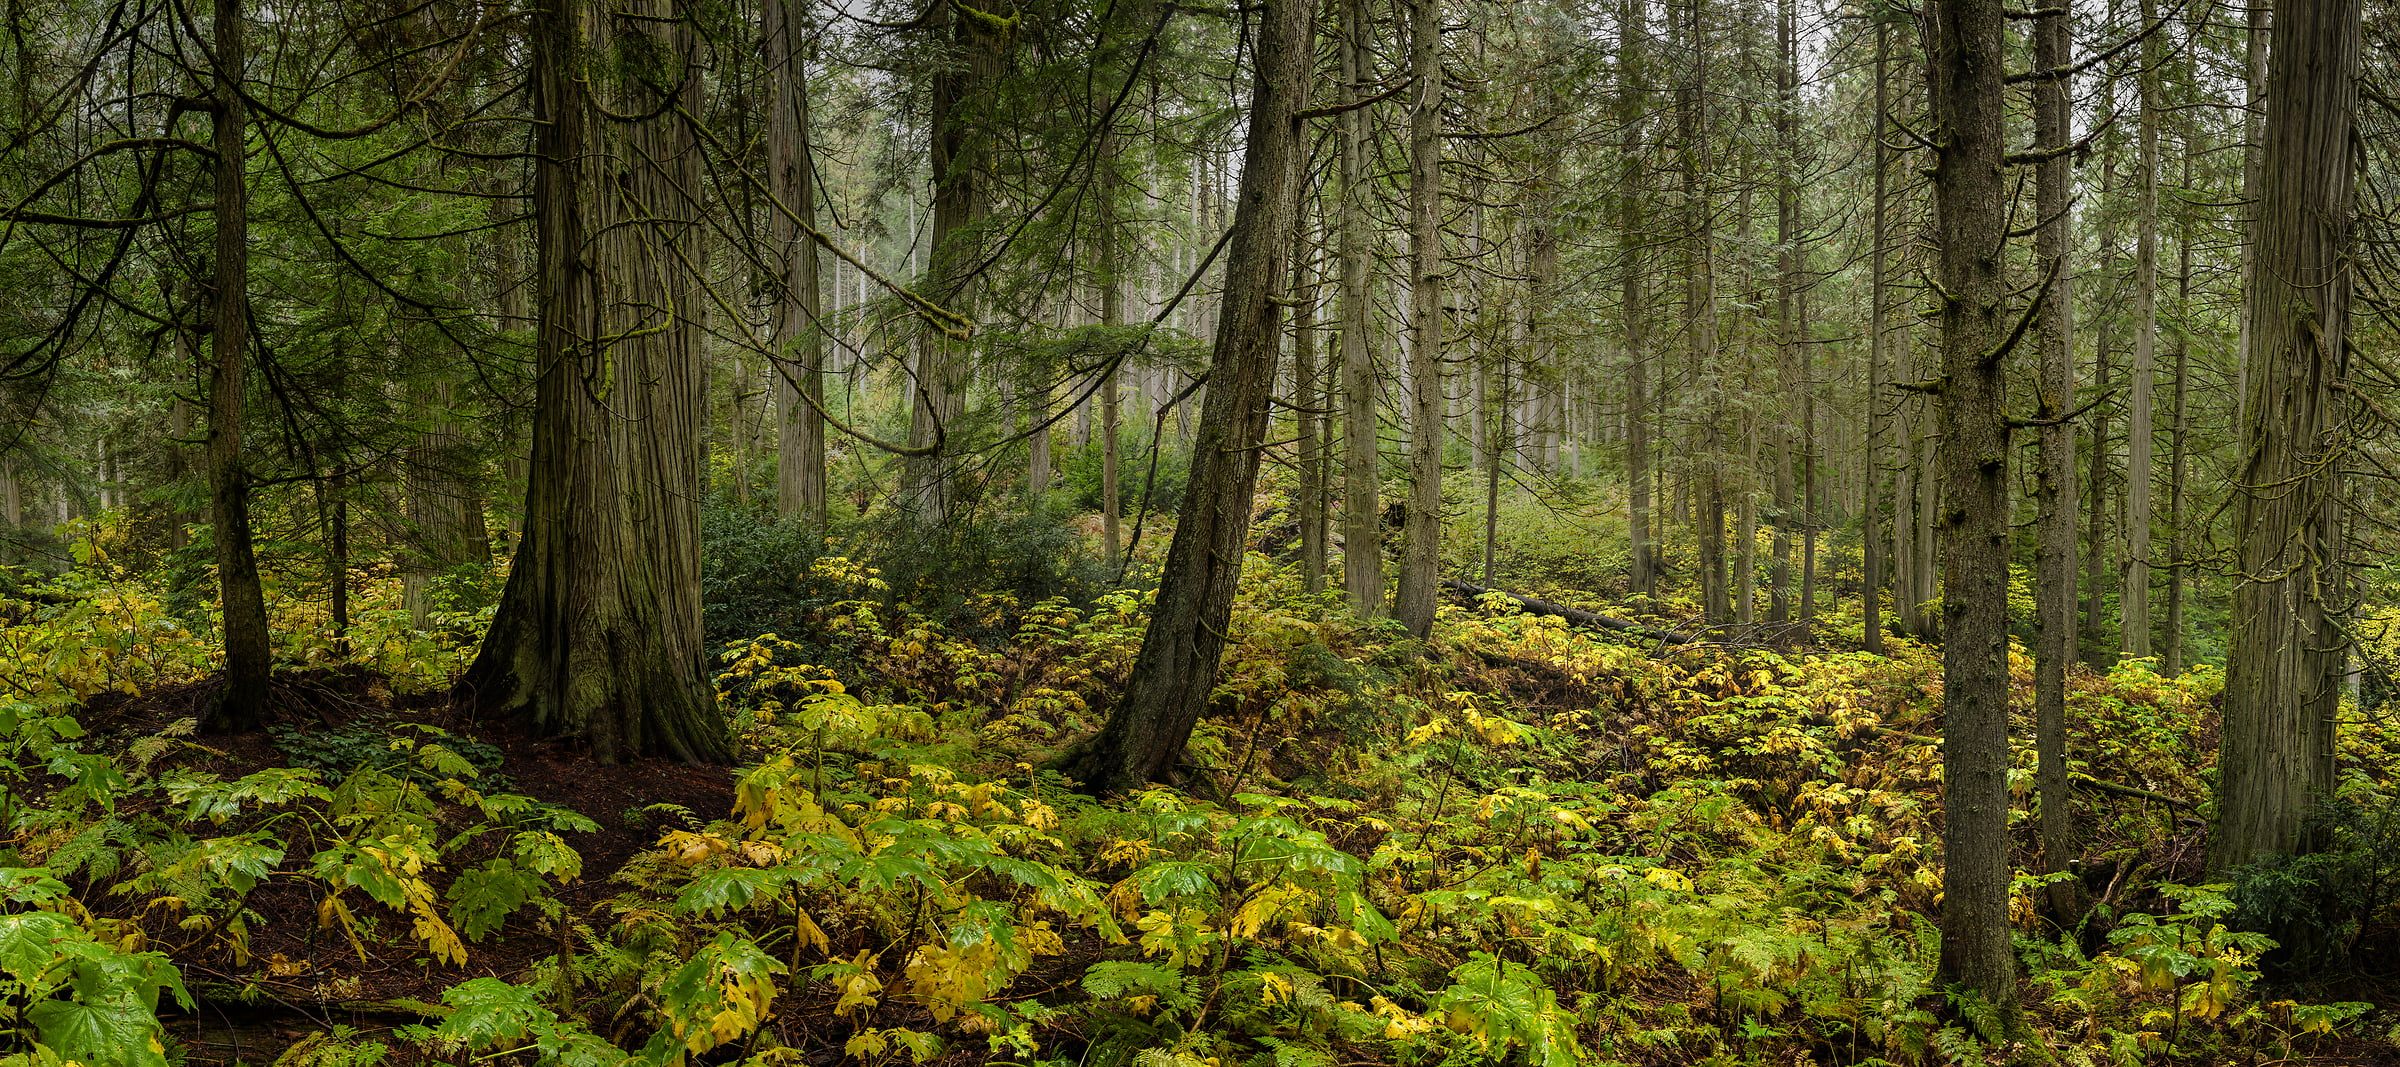 2,190 megapixels! A very high resolution, large-format VAST photo print of a forest with cedar trees and ferns; nature photograph created by Scott Dimond in Mount Revelstoke National Park, British Columbia, Canada